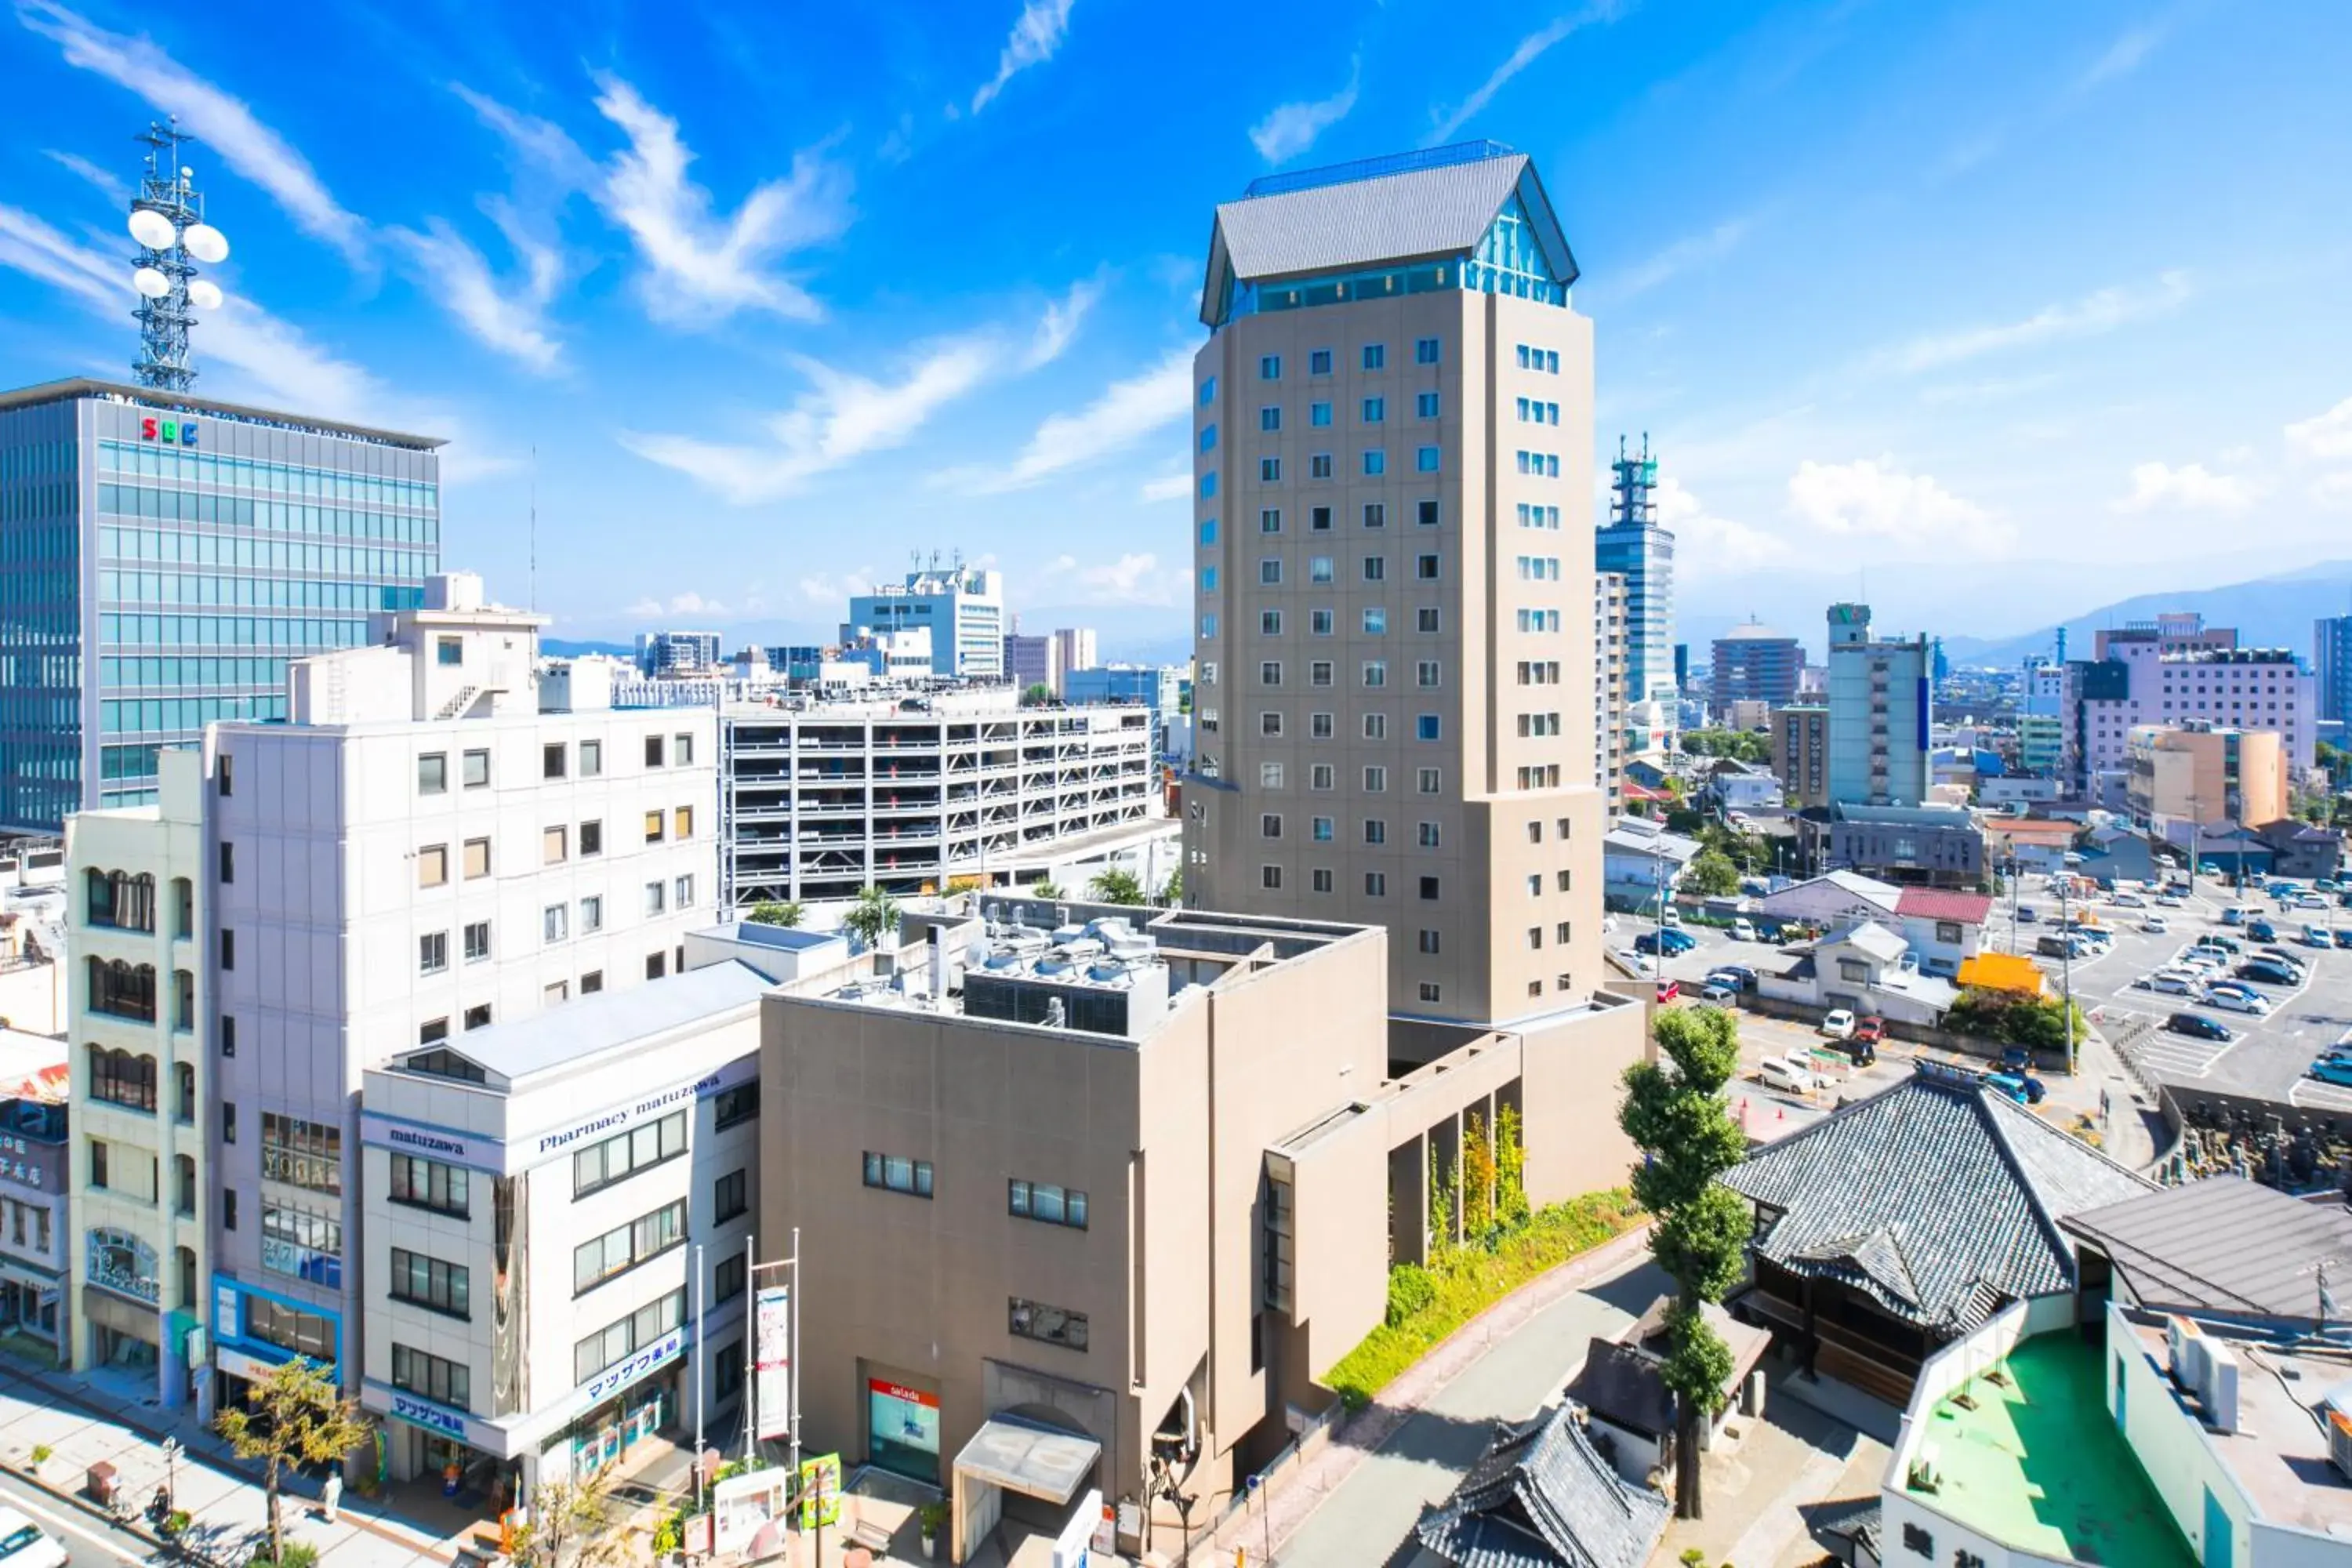 Property building in Hotel Jal City Nagano